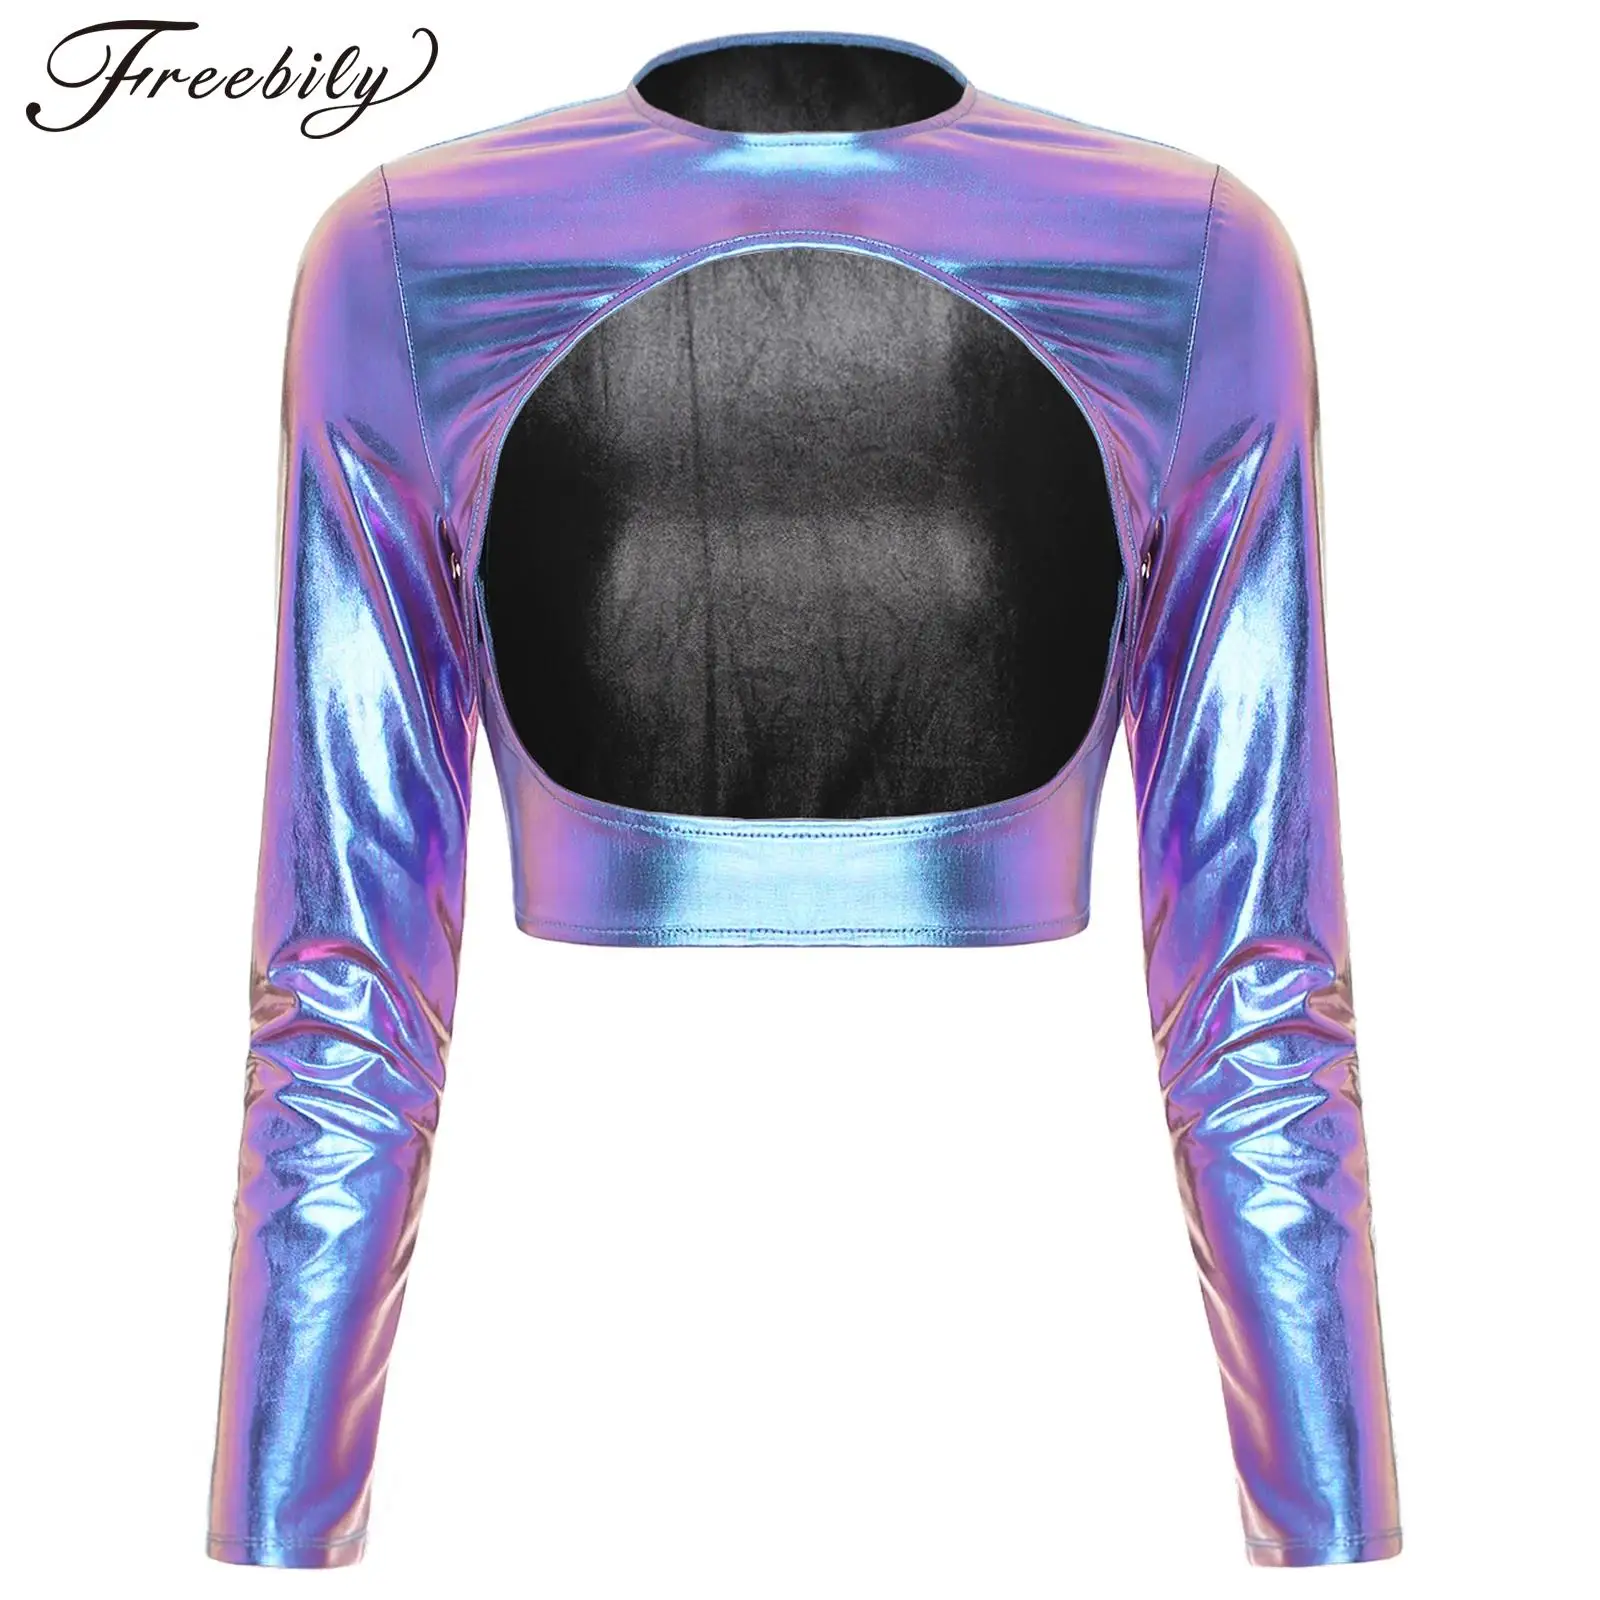 

Womens Metallic Shiny Cut Out Crop Top Long Sleeve Open Front Tee Tops for Disco Bar Rave Party Costume Femme Sexy Clubwear